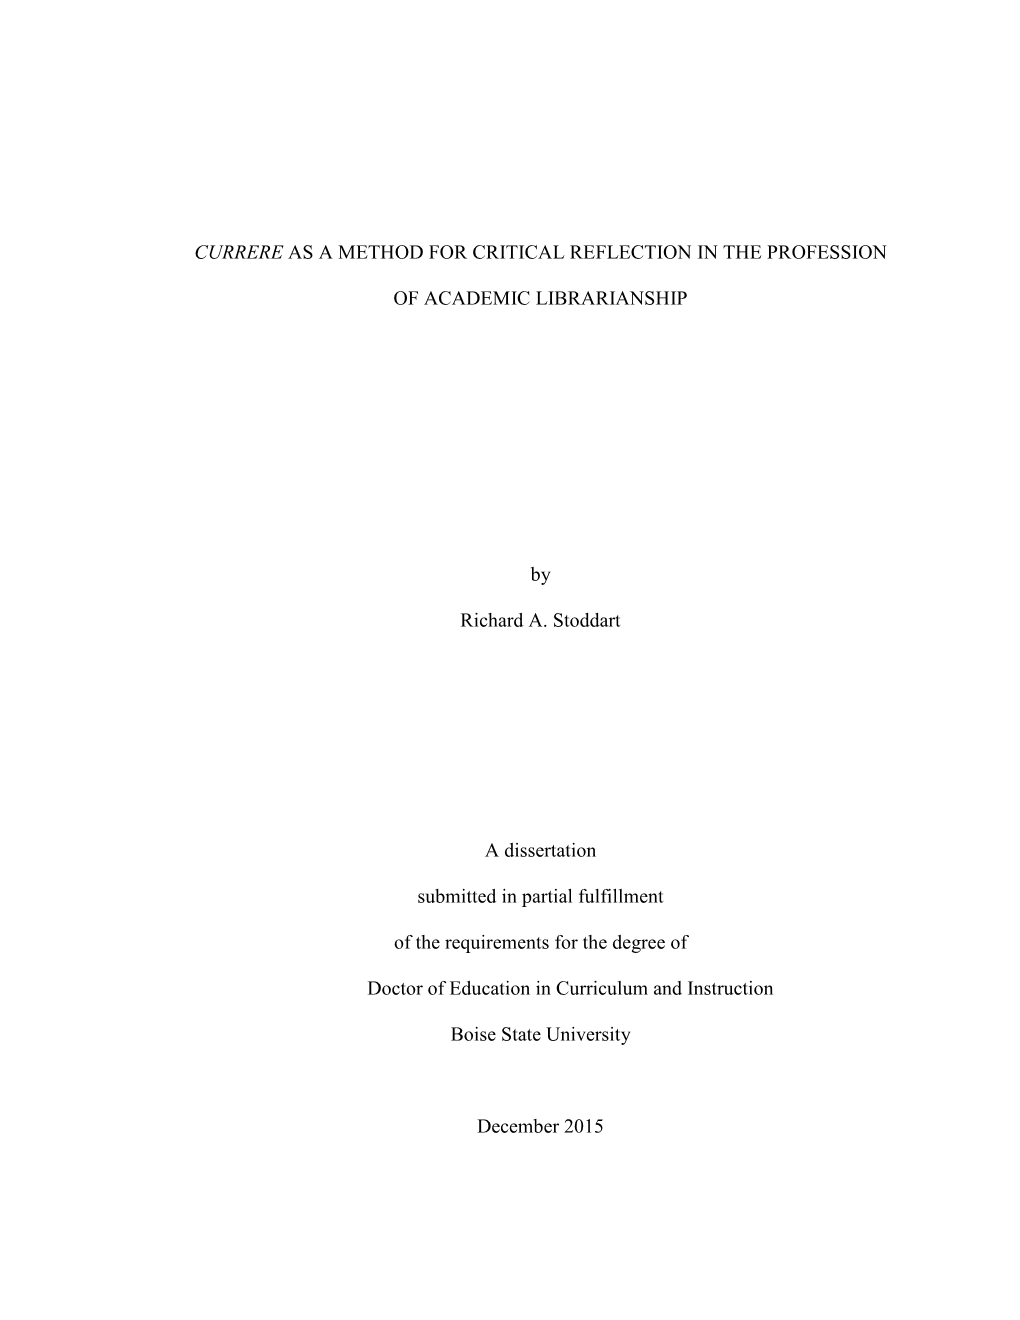 Currere As a Method for Critical Reflection in the Profession of Academic Librarianship